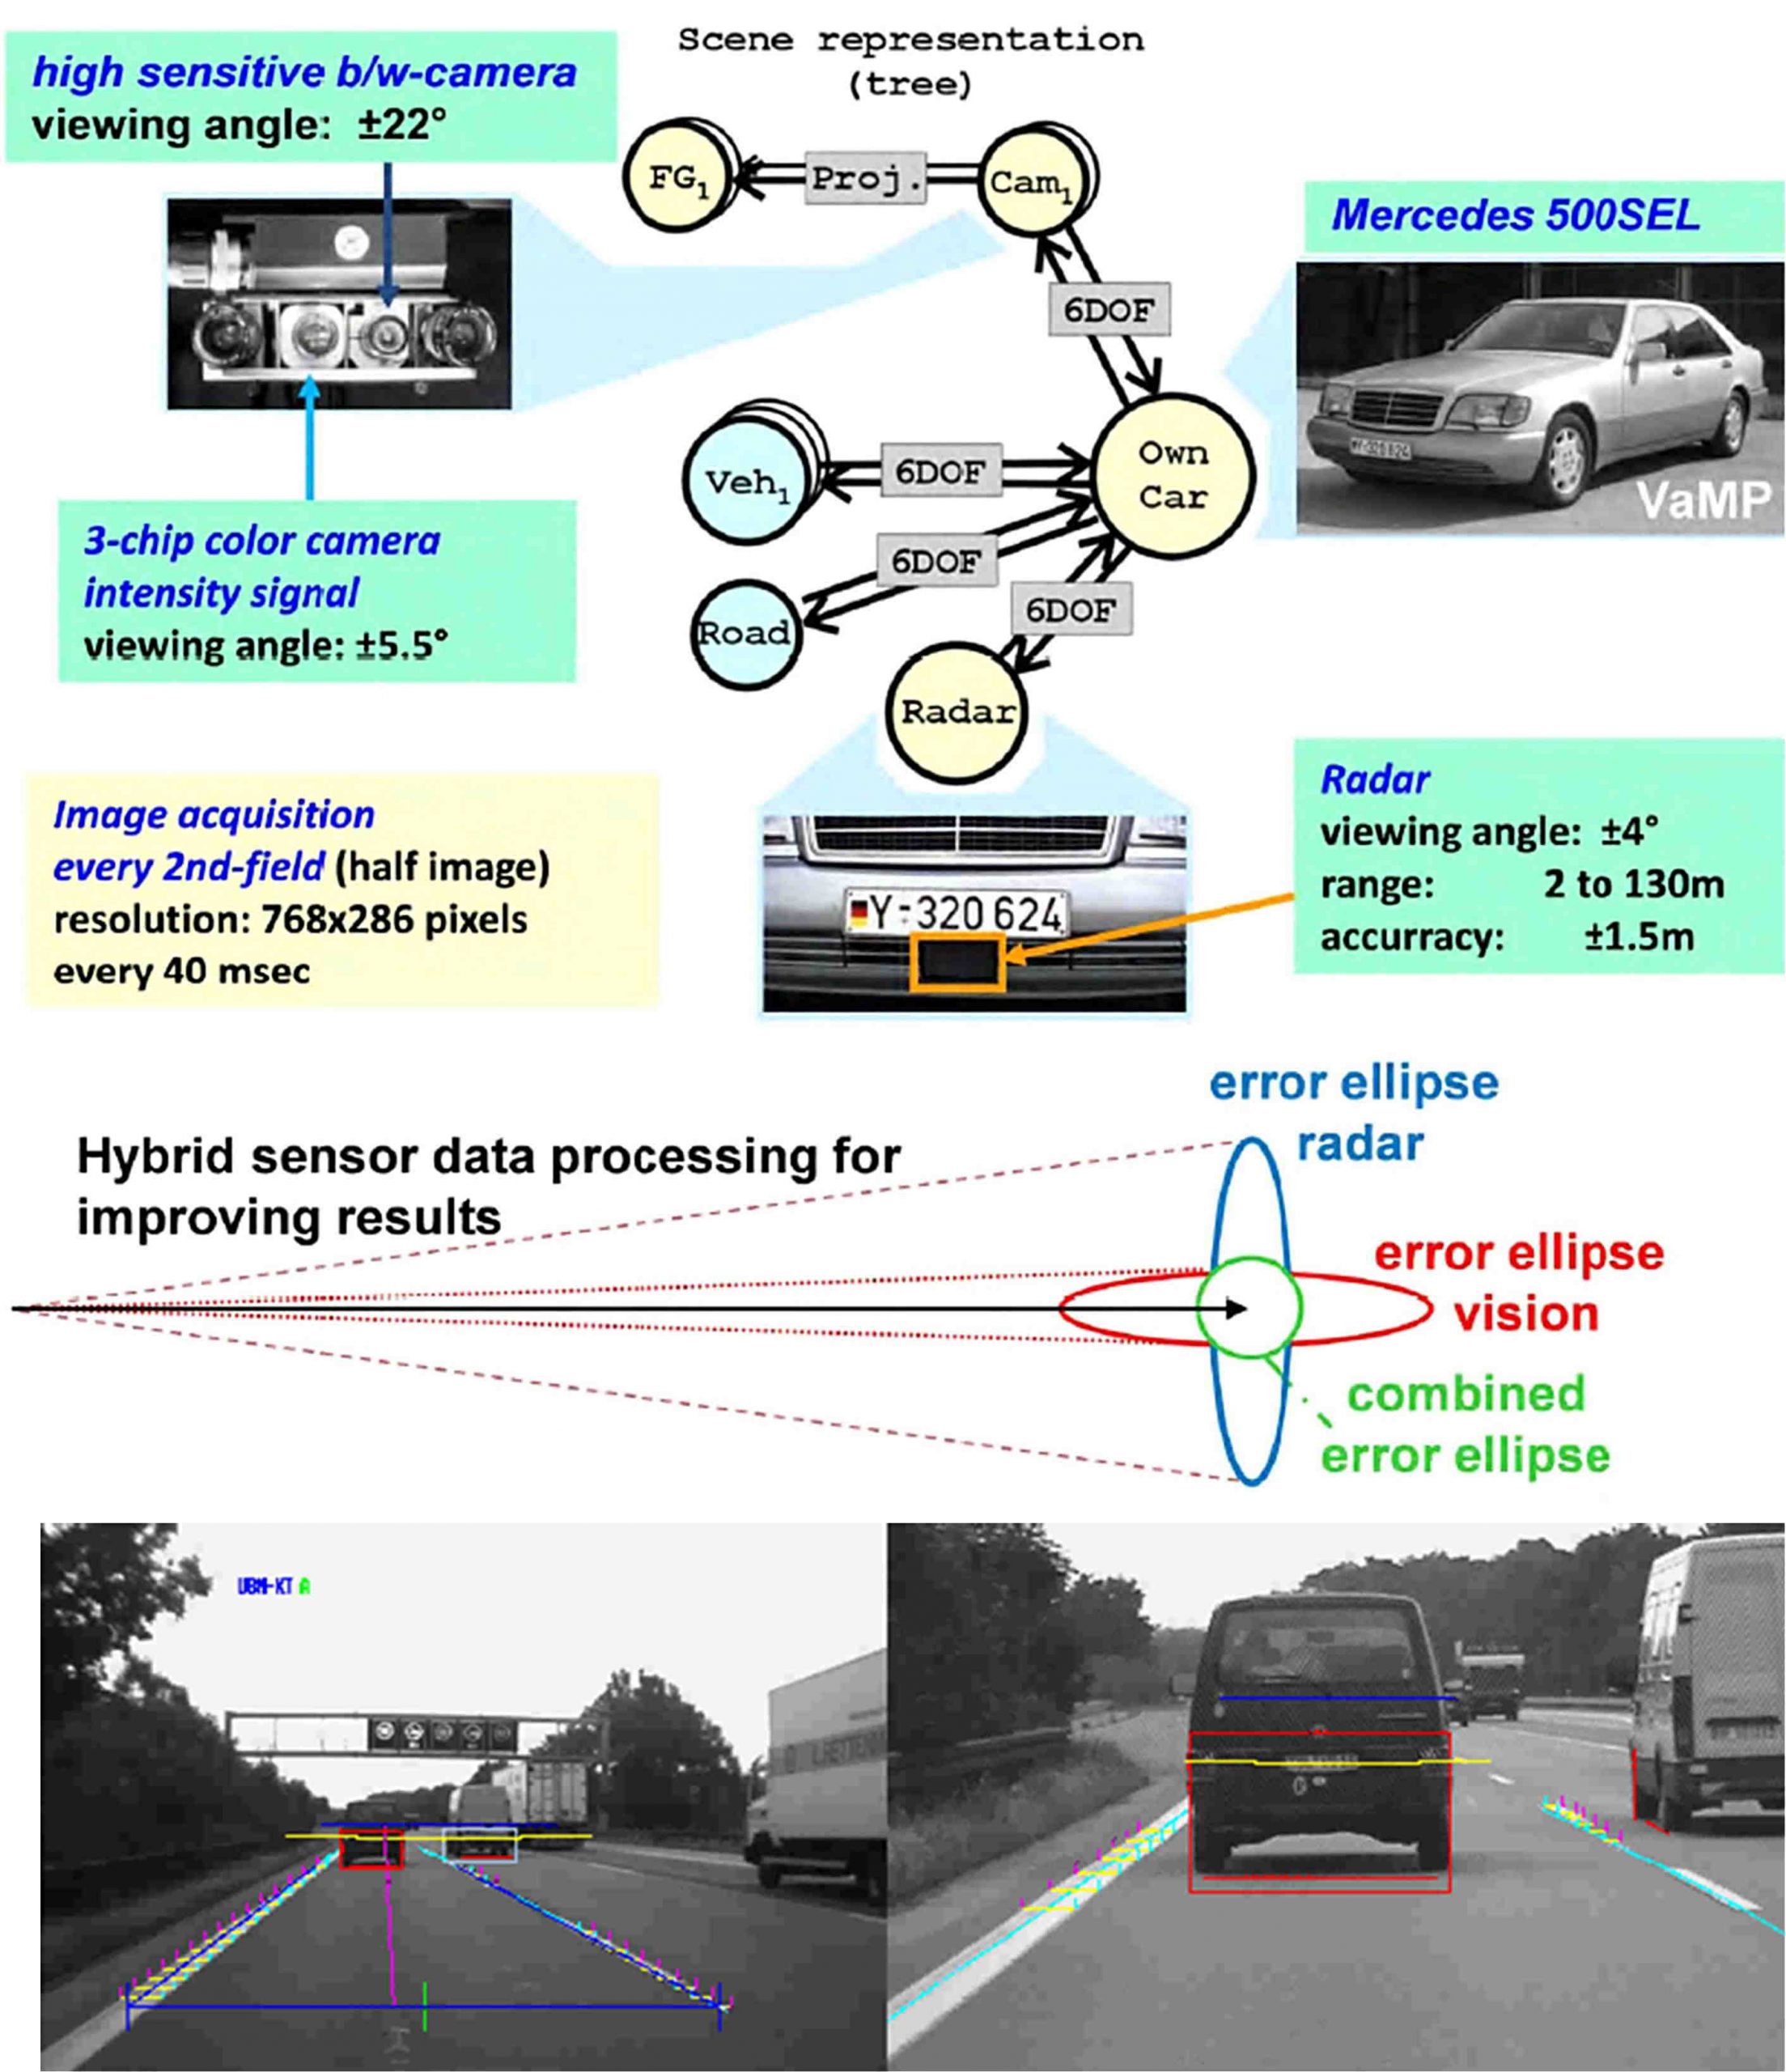 adaptive cruise control use sonar for object detection